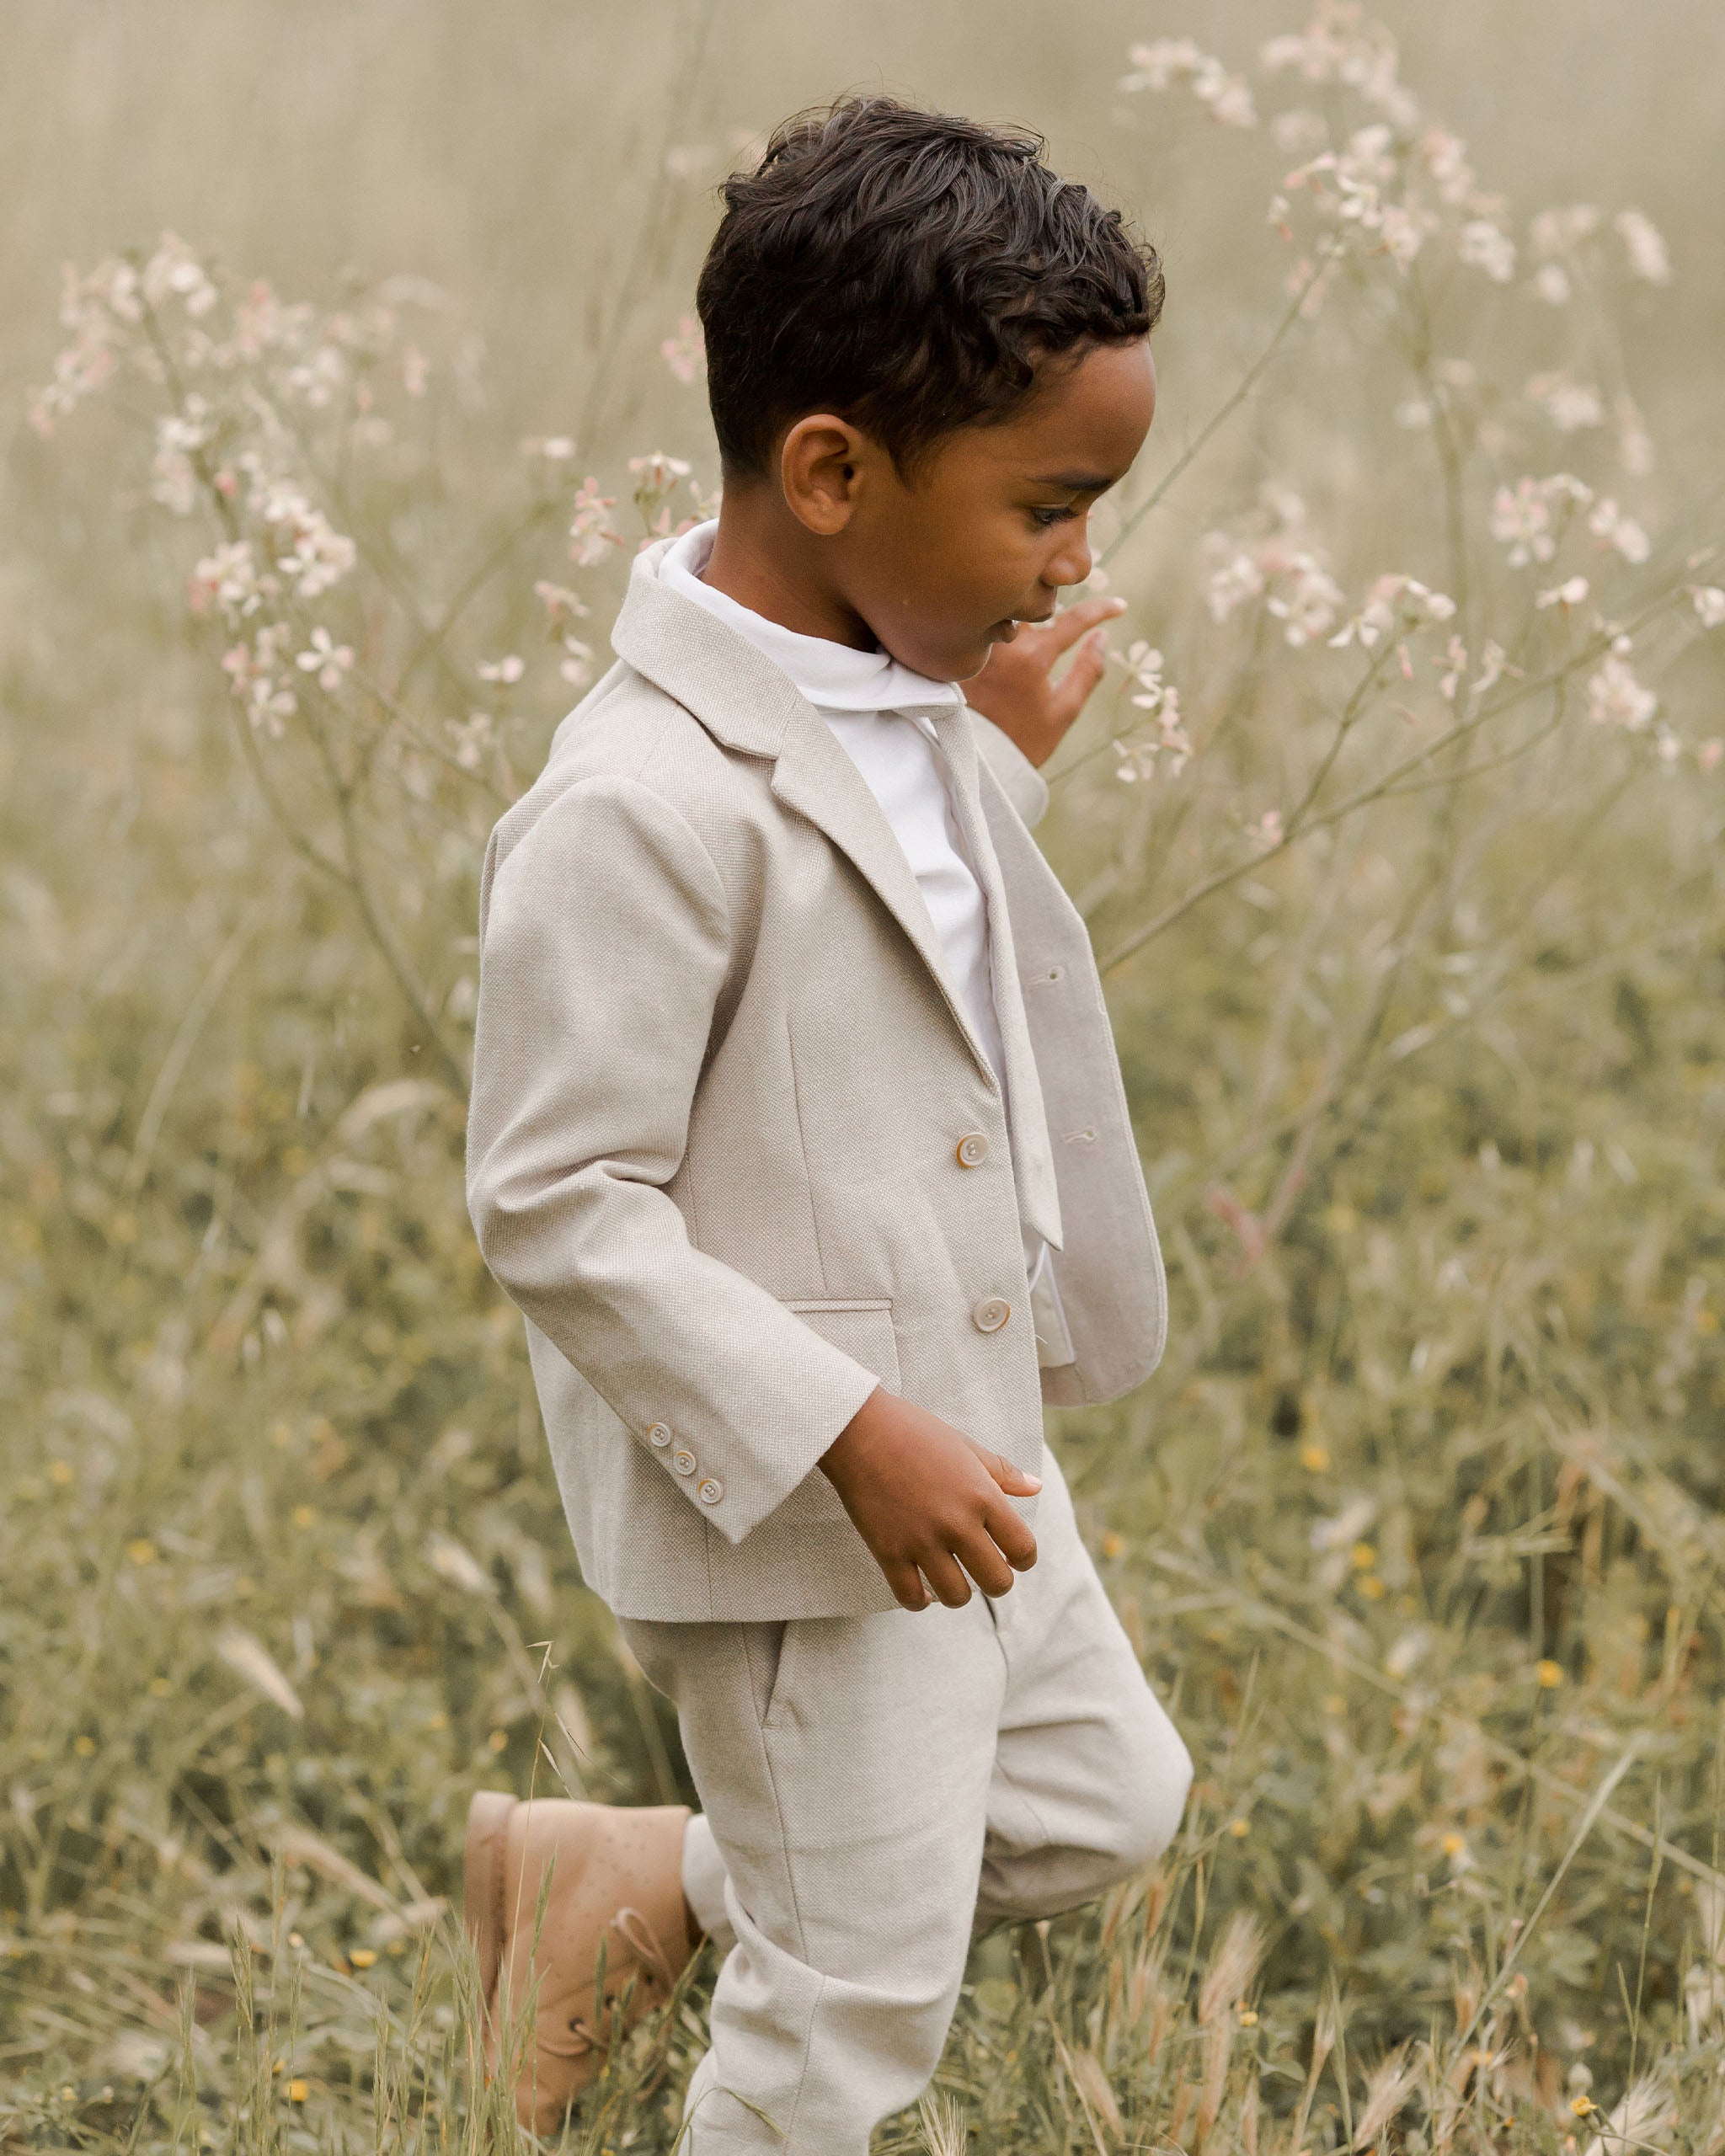 Skinny Tie || Fog - Rylee + Cru | Kids Clothes | Trendy Baby Clothes | Modern Infant Outfits |